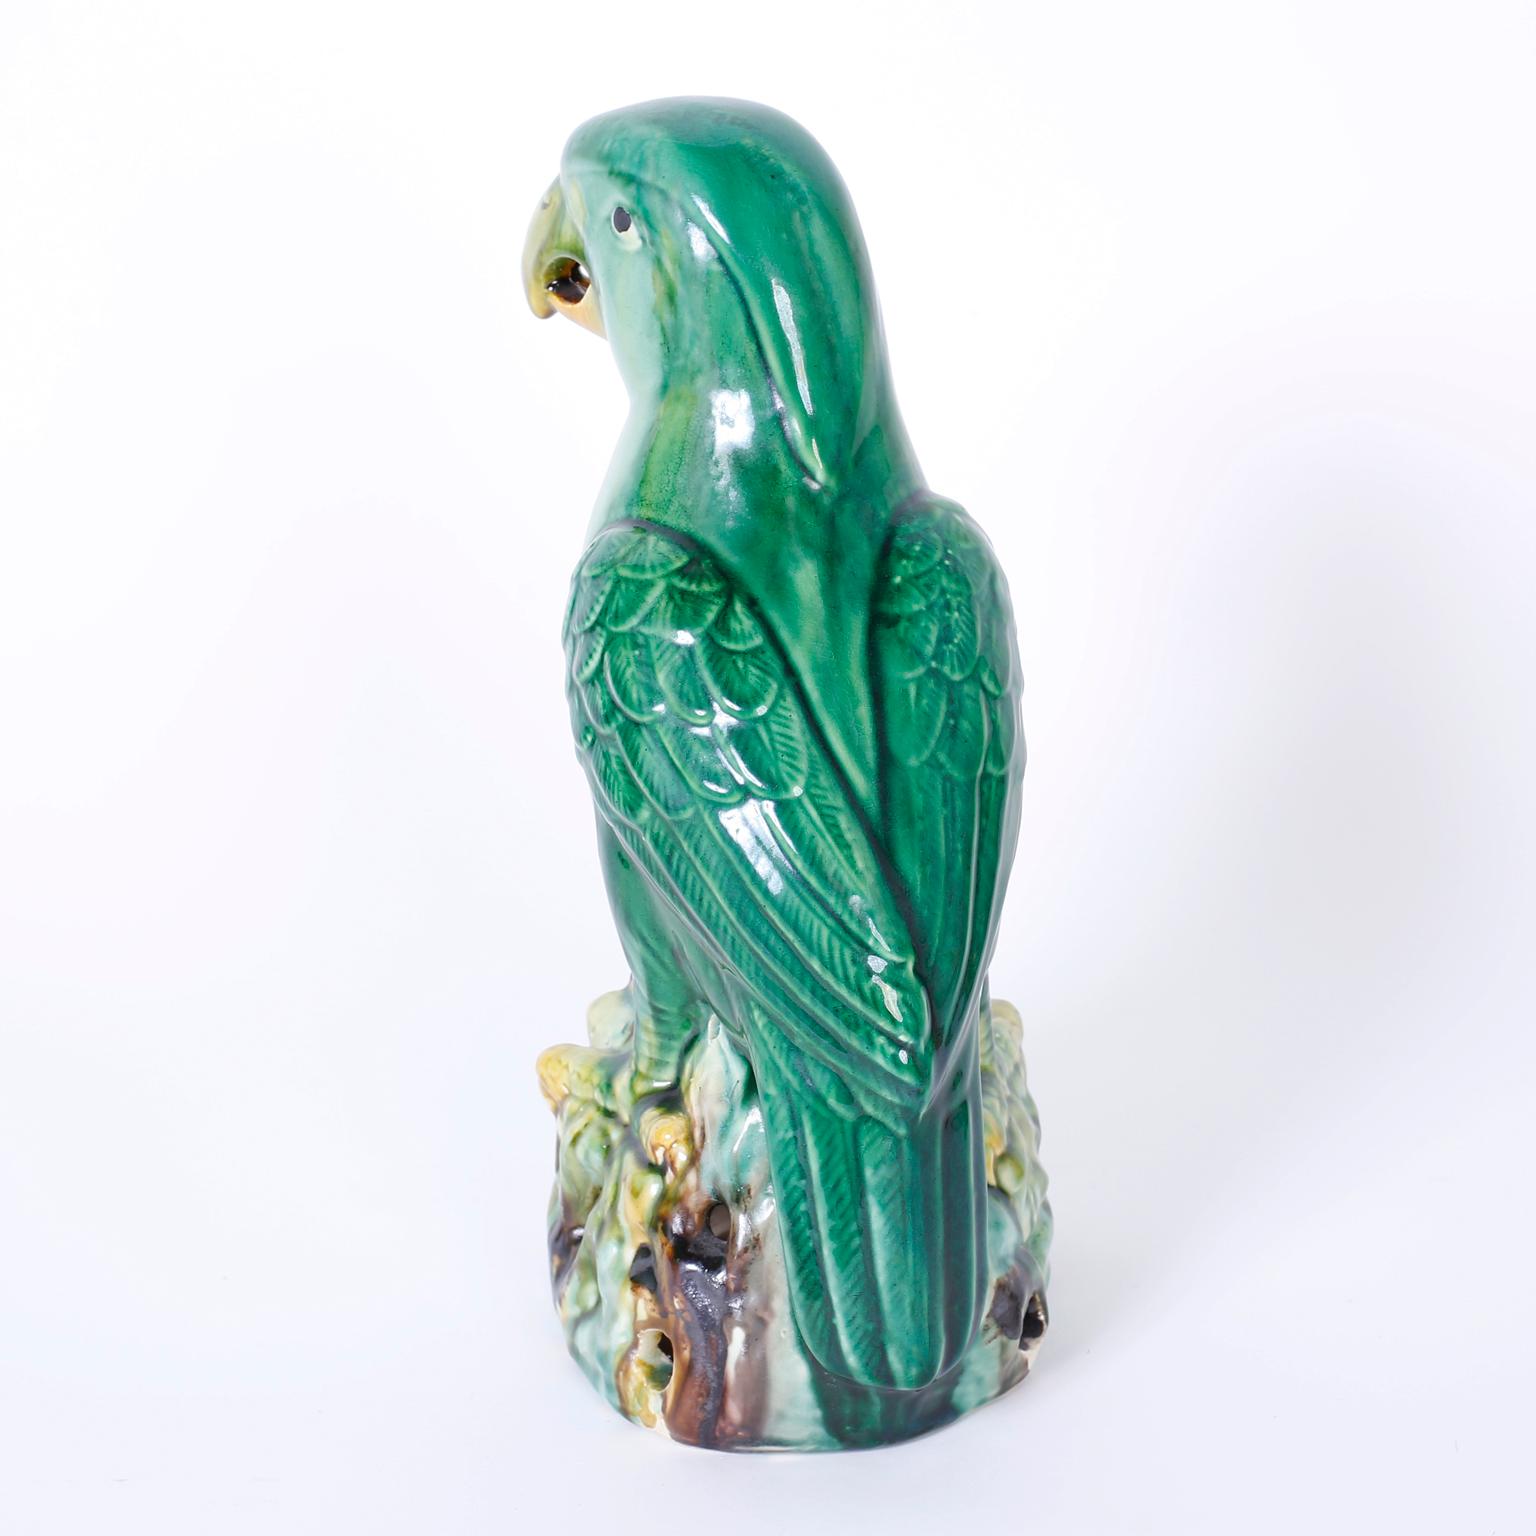 Chinese Pair of Glazed Terracotta or Sancai Parrots